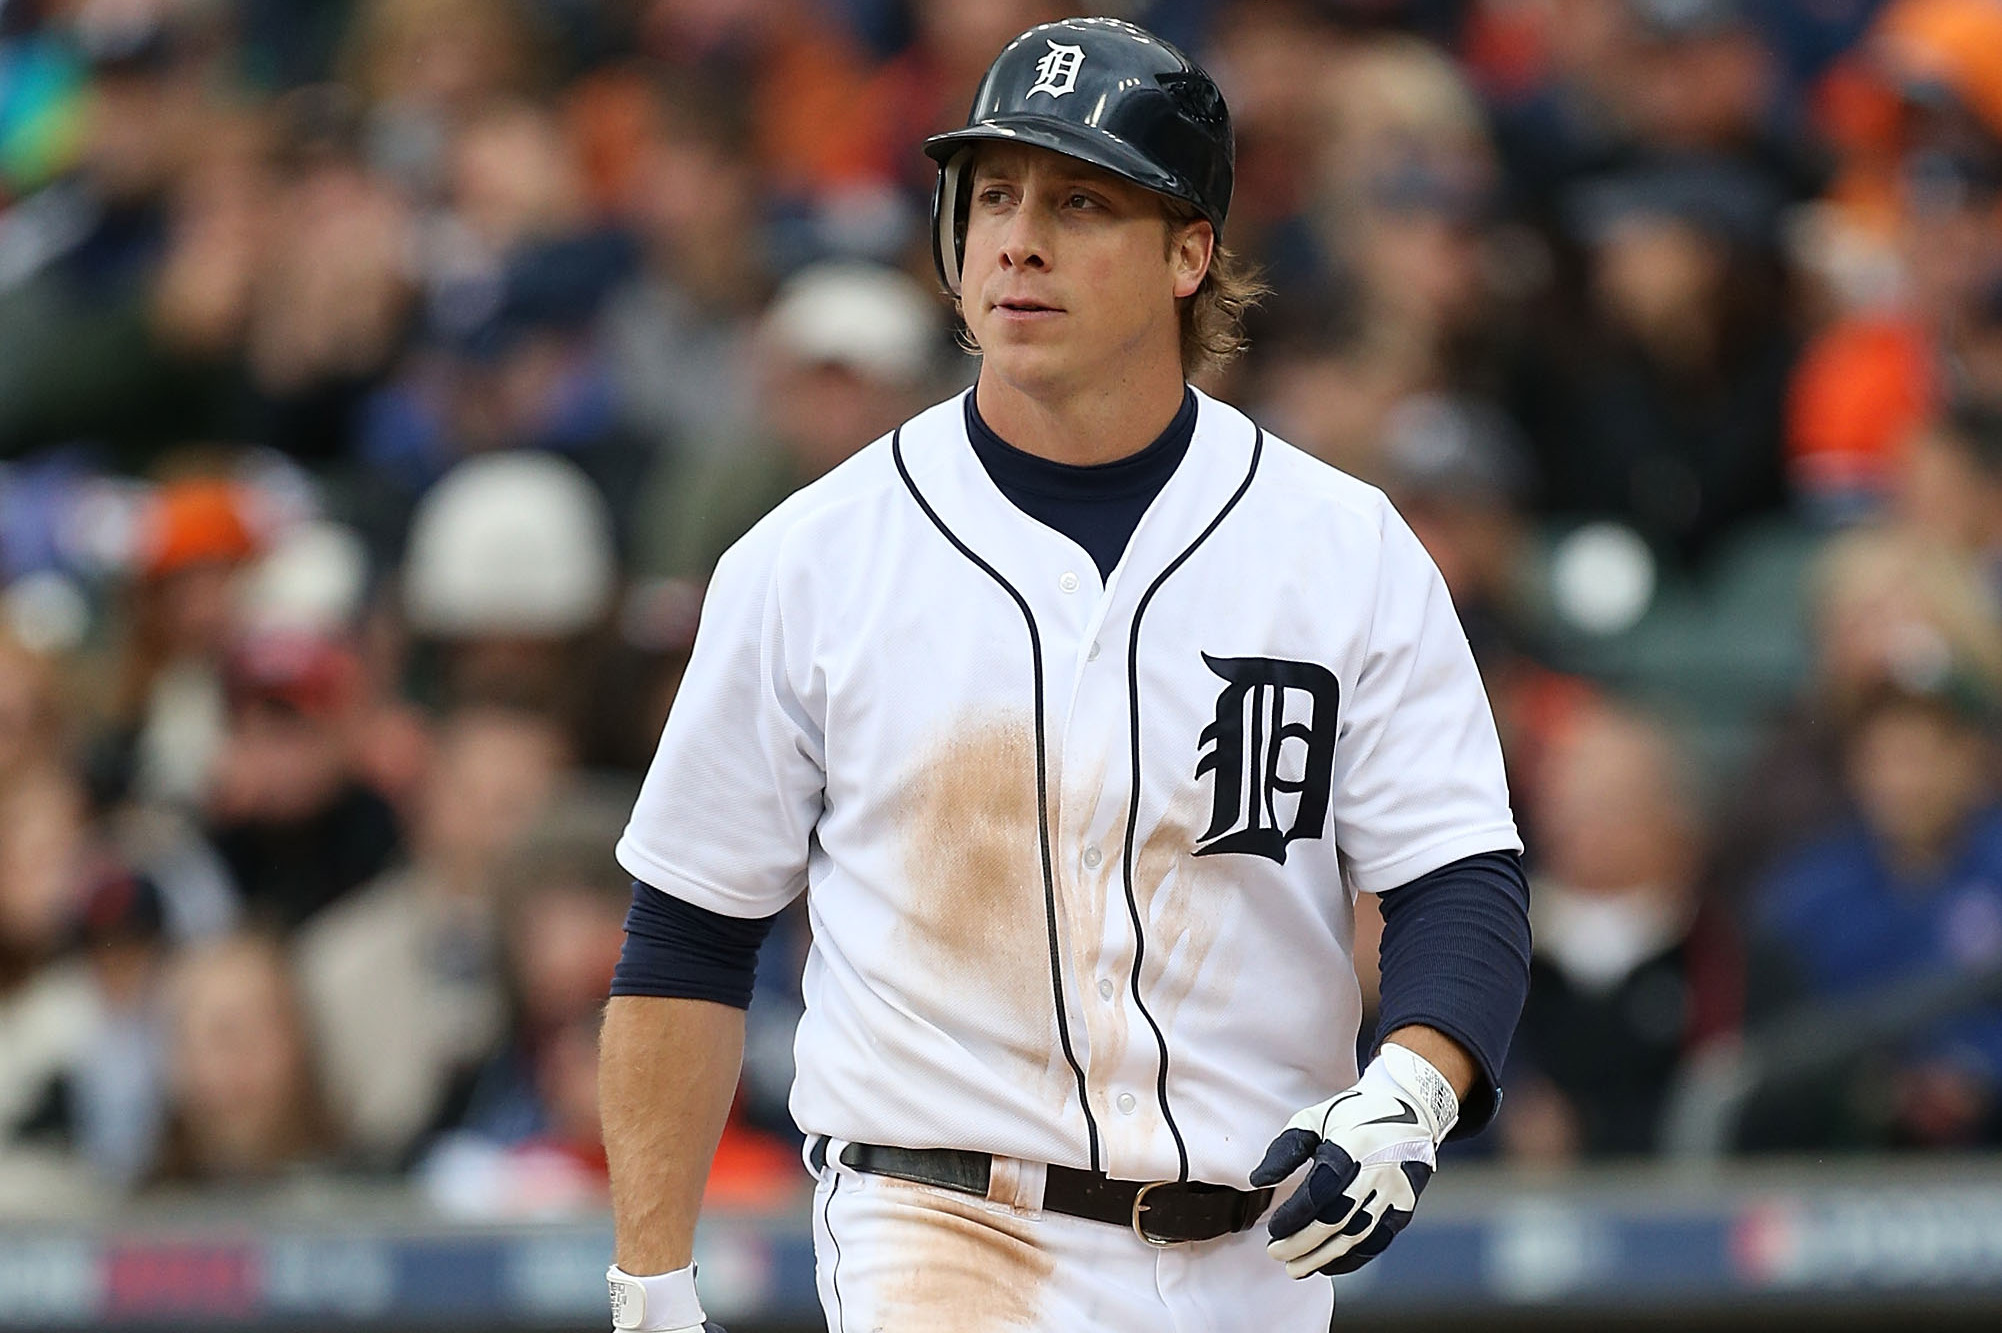 Detroit Tigers: Andy Dirks Poised for Breakout Season After